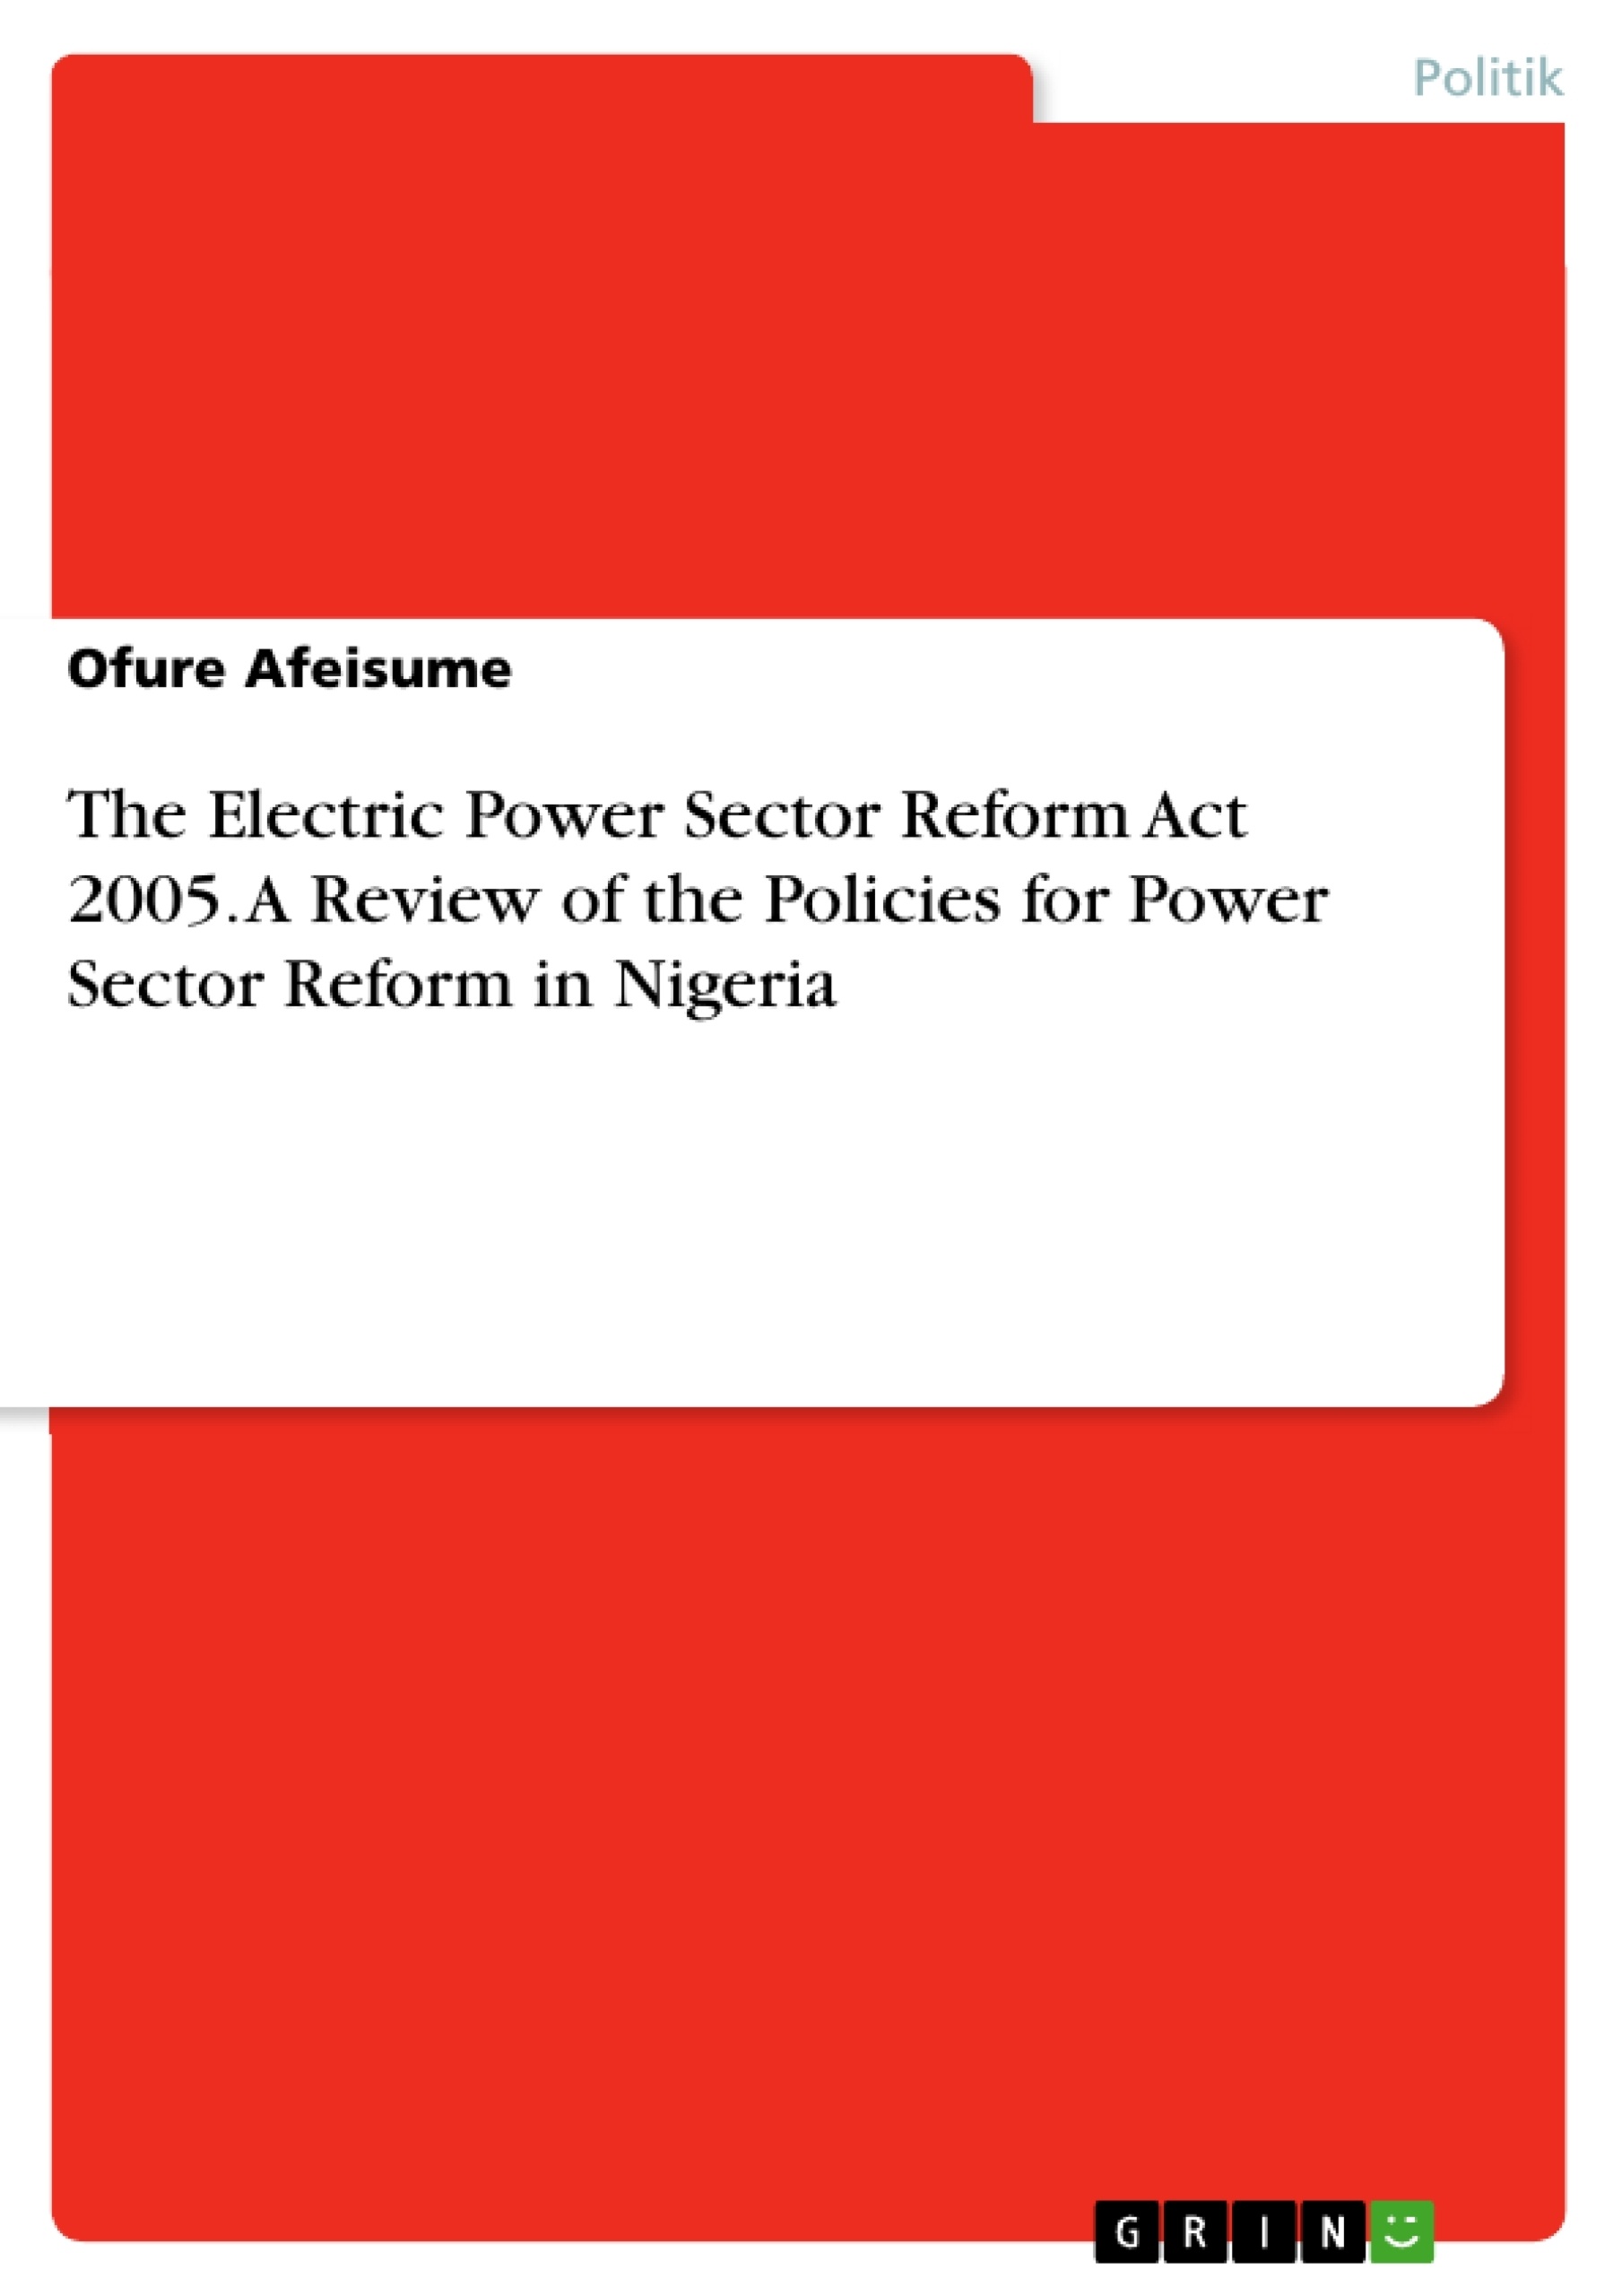 Titel: The Electric Power Sector Reform Act 2005. A Review of the Policies for Power Sector Reform in Nigeria